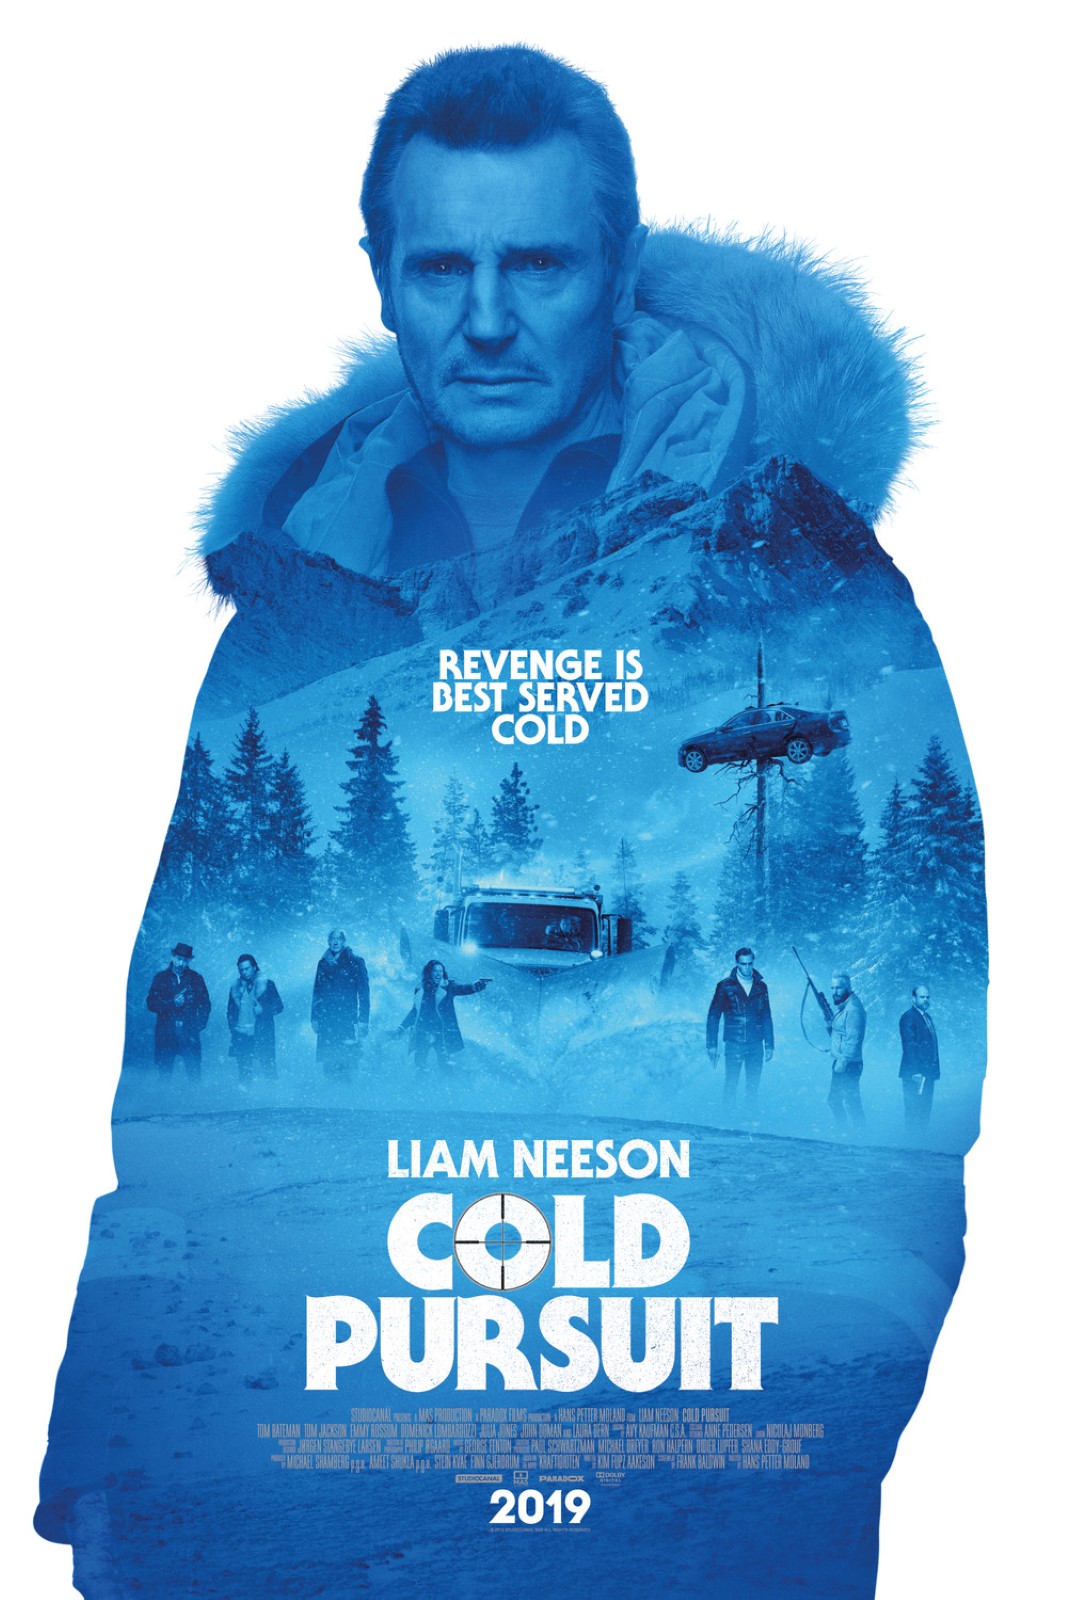 Cold Pursuit 2019 Full Movie Free Online